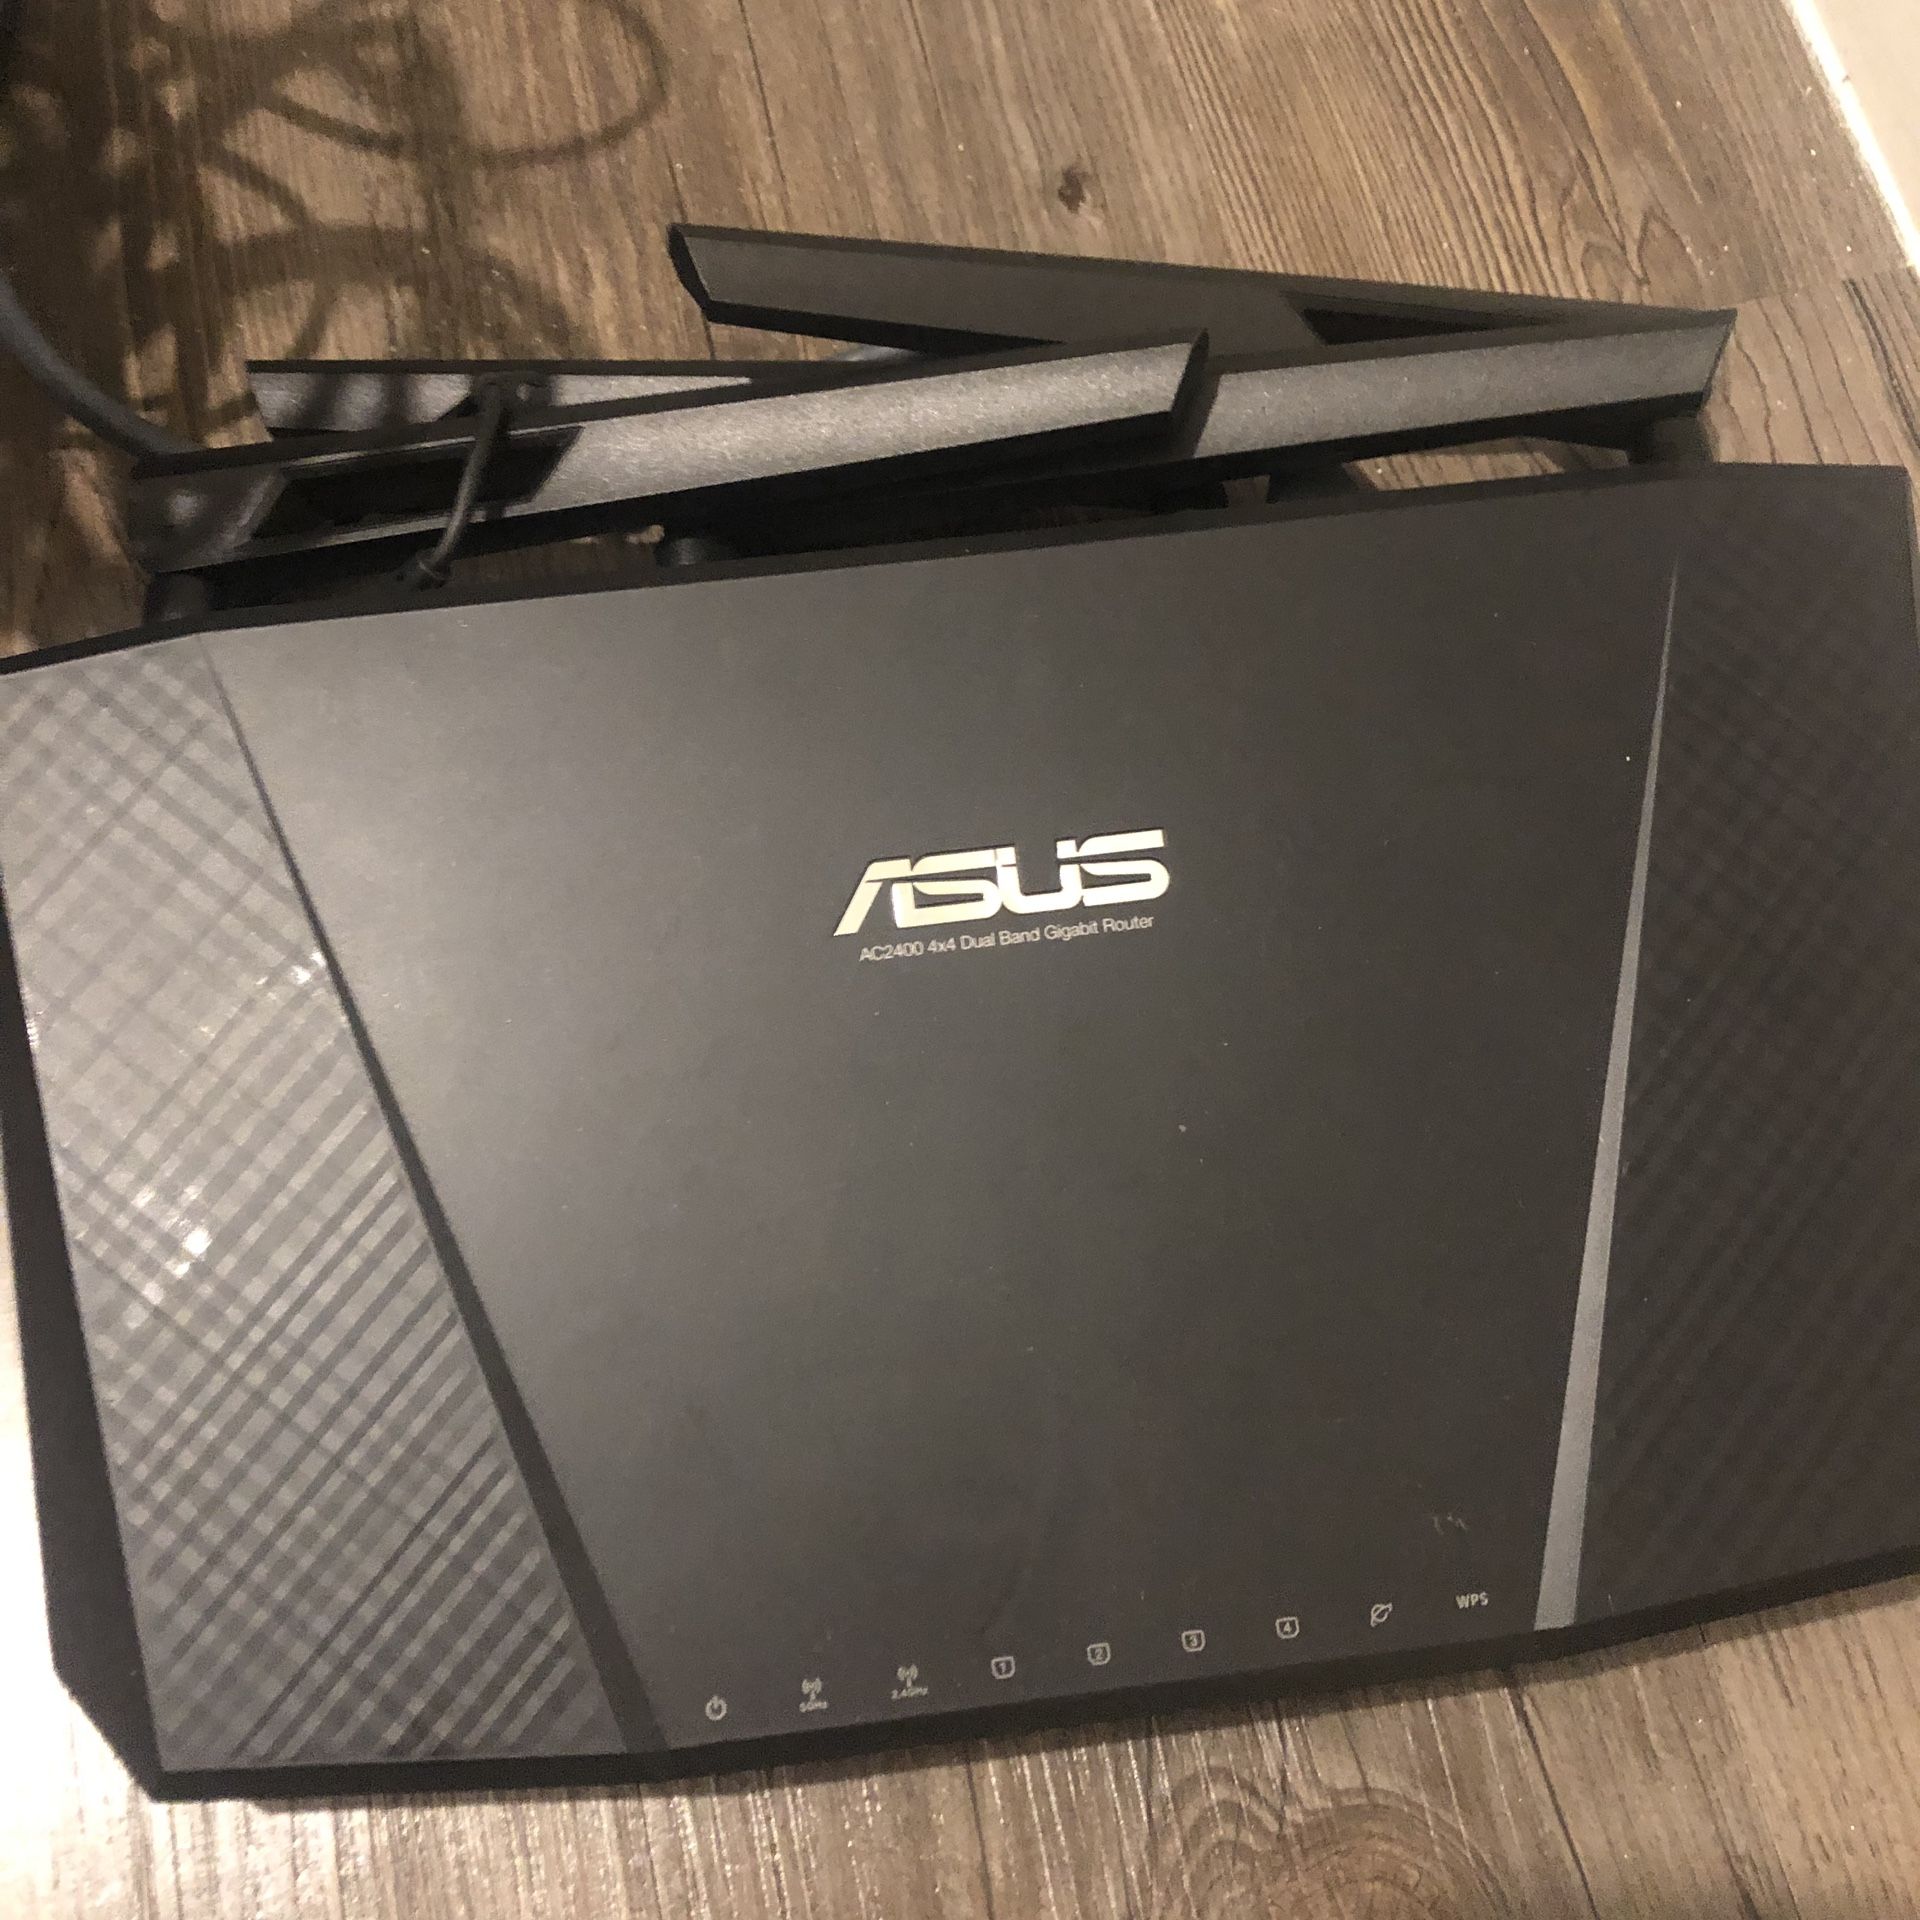 Asus router ac2400